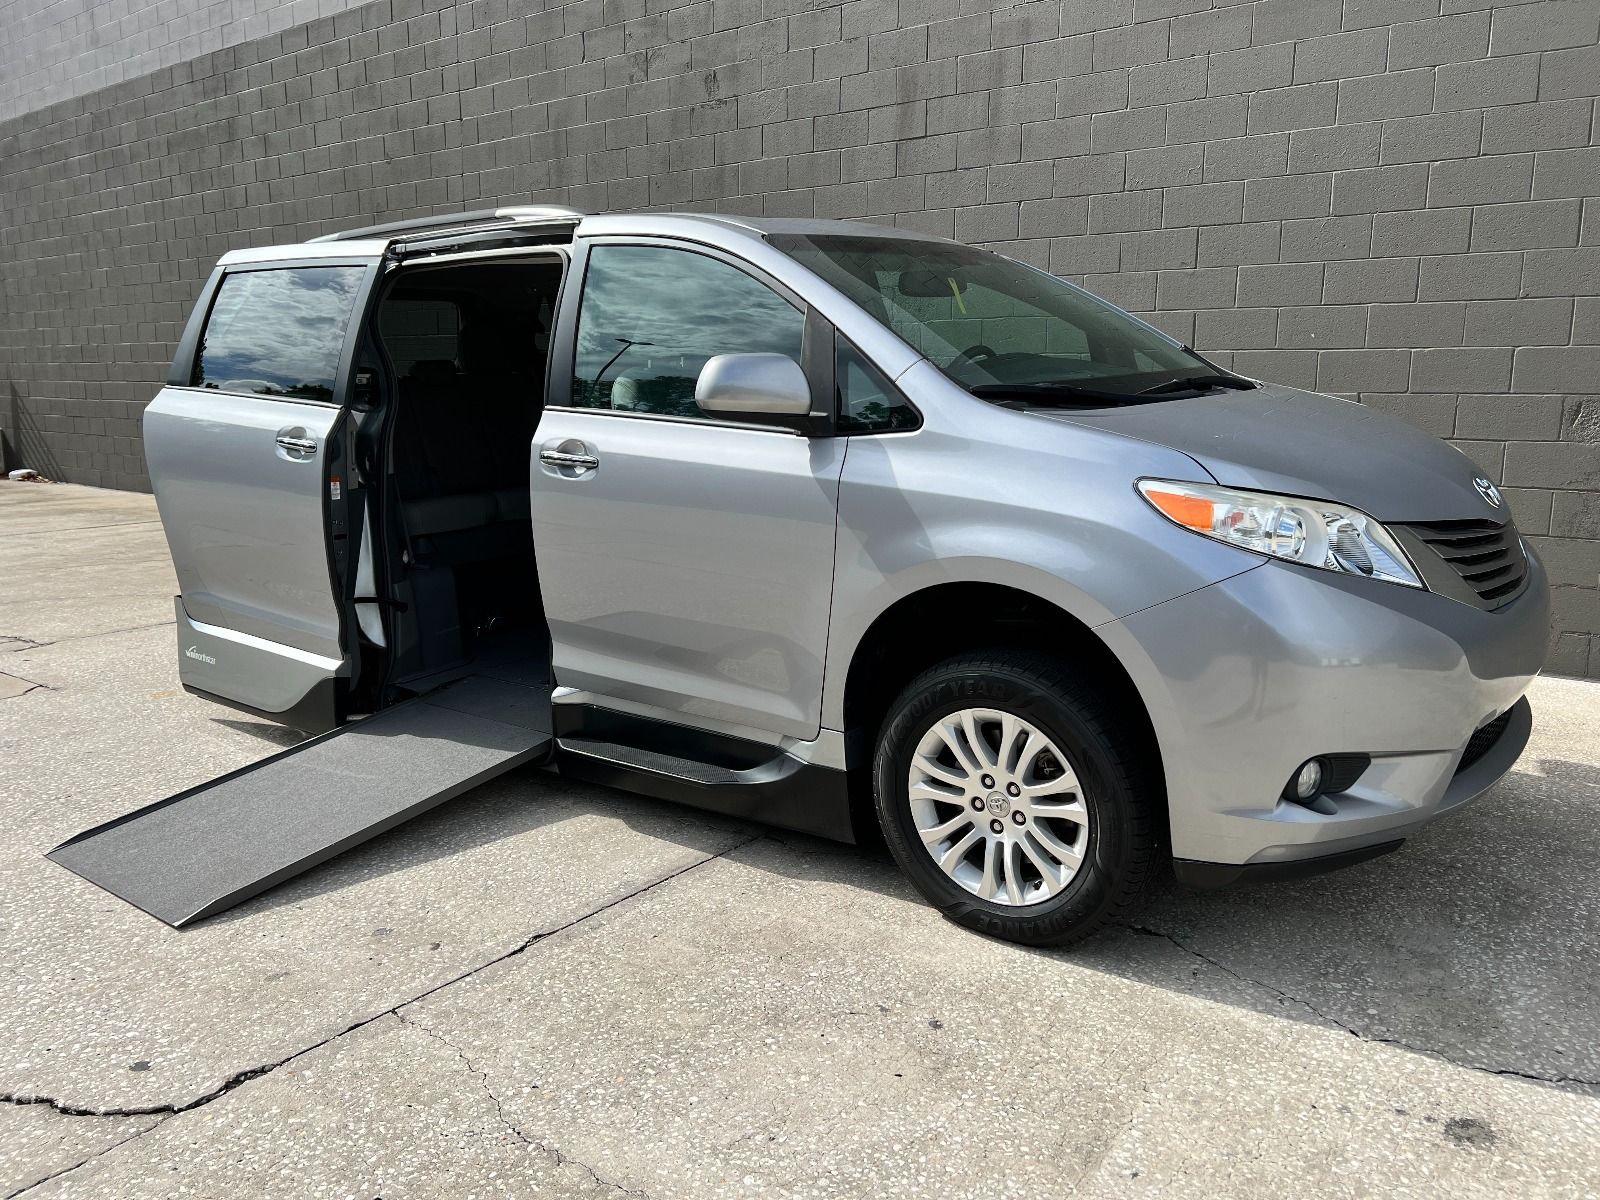 Silver Toyota Sienna wheelchair van with sliding door open and ramp deployed, viewed from front corner angle.